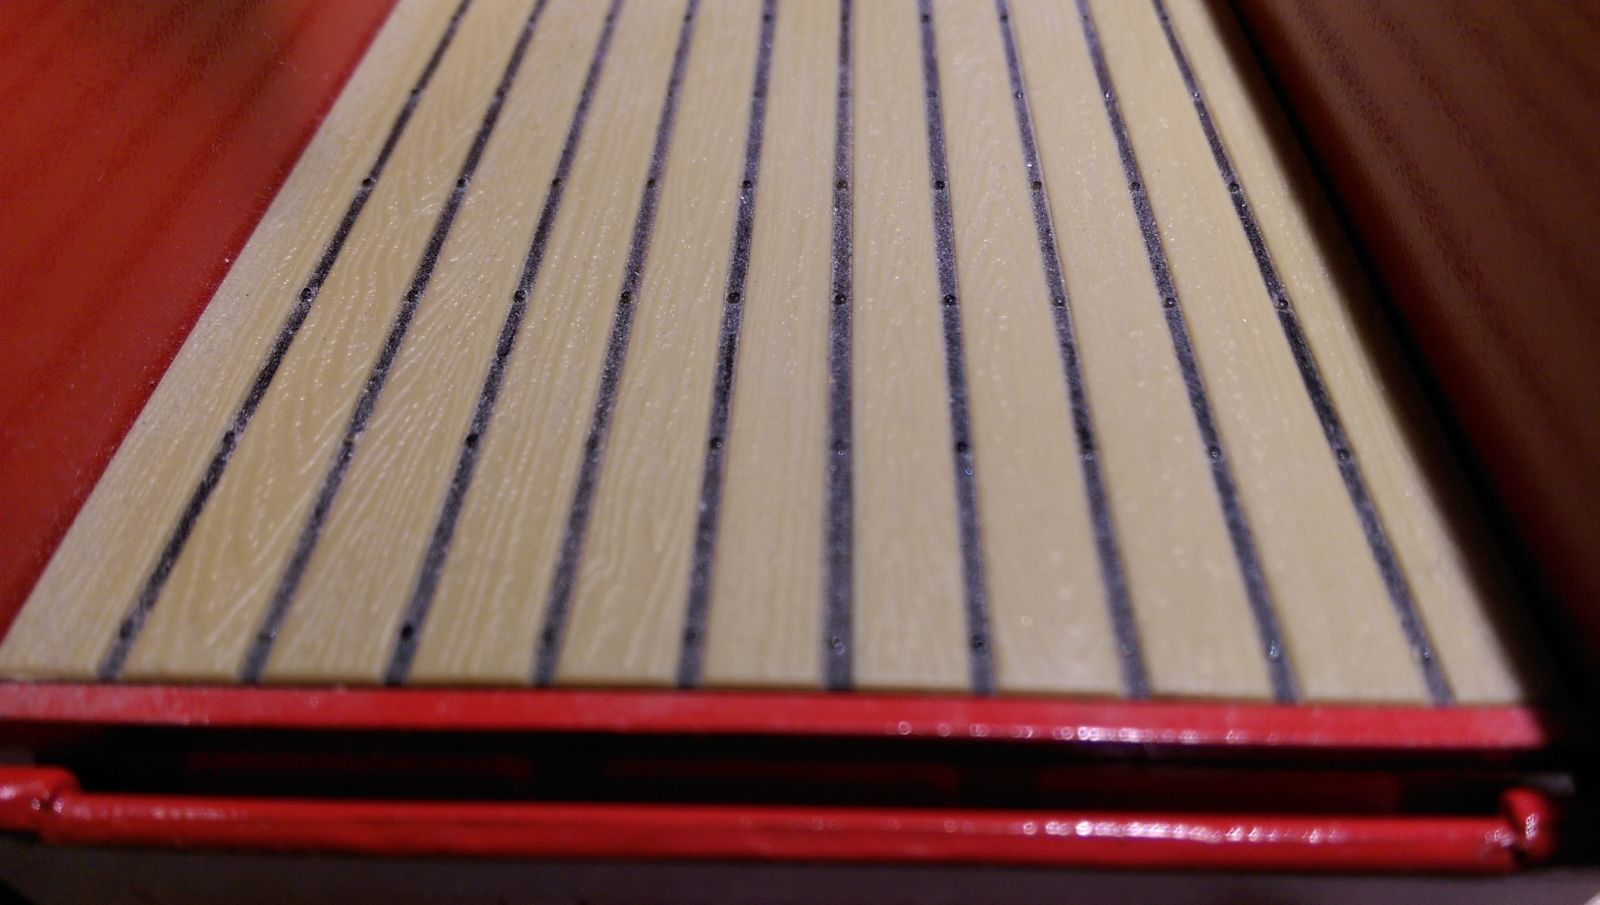 Accurate looking wood grain, and the bolts that hold the slats to the bed. 